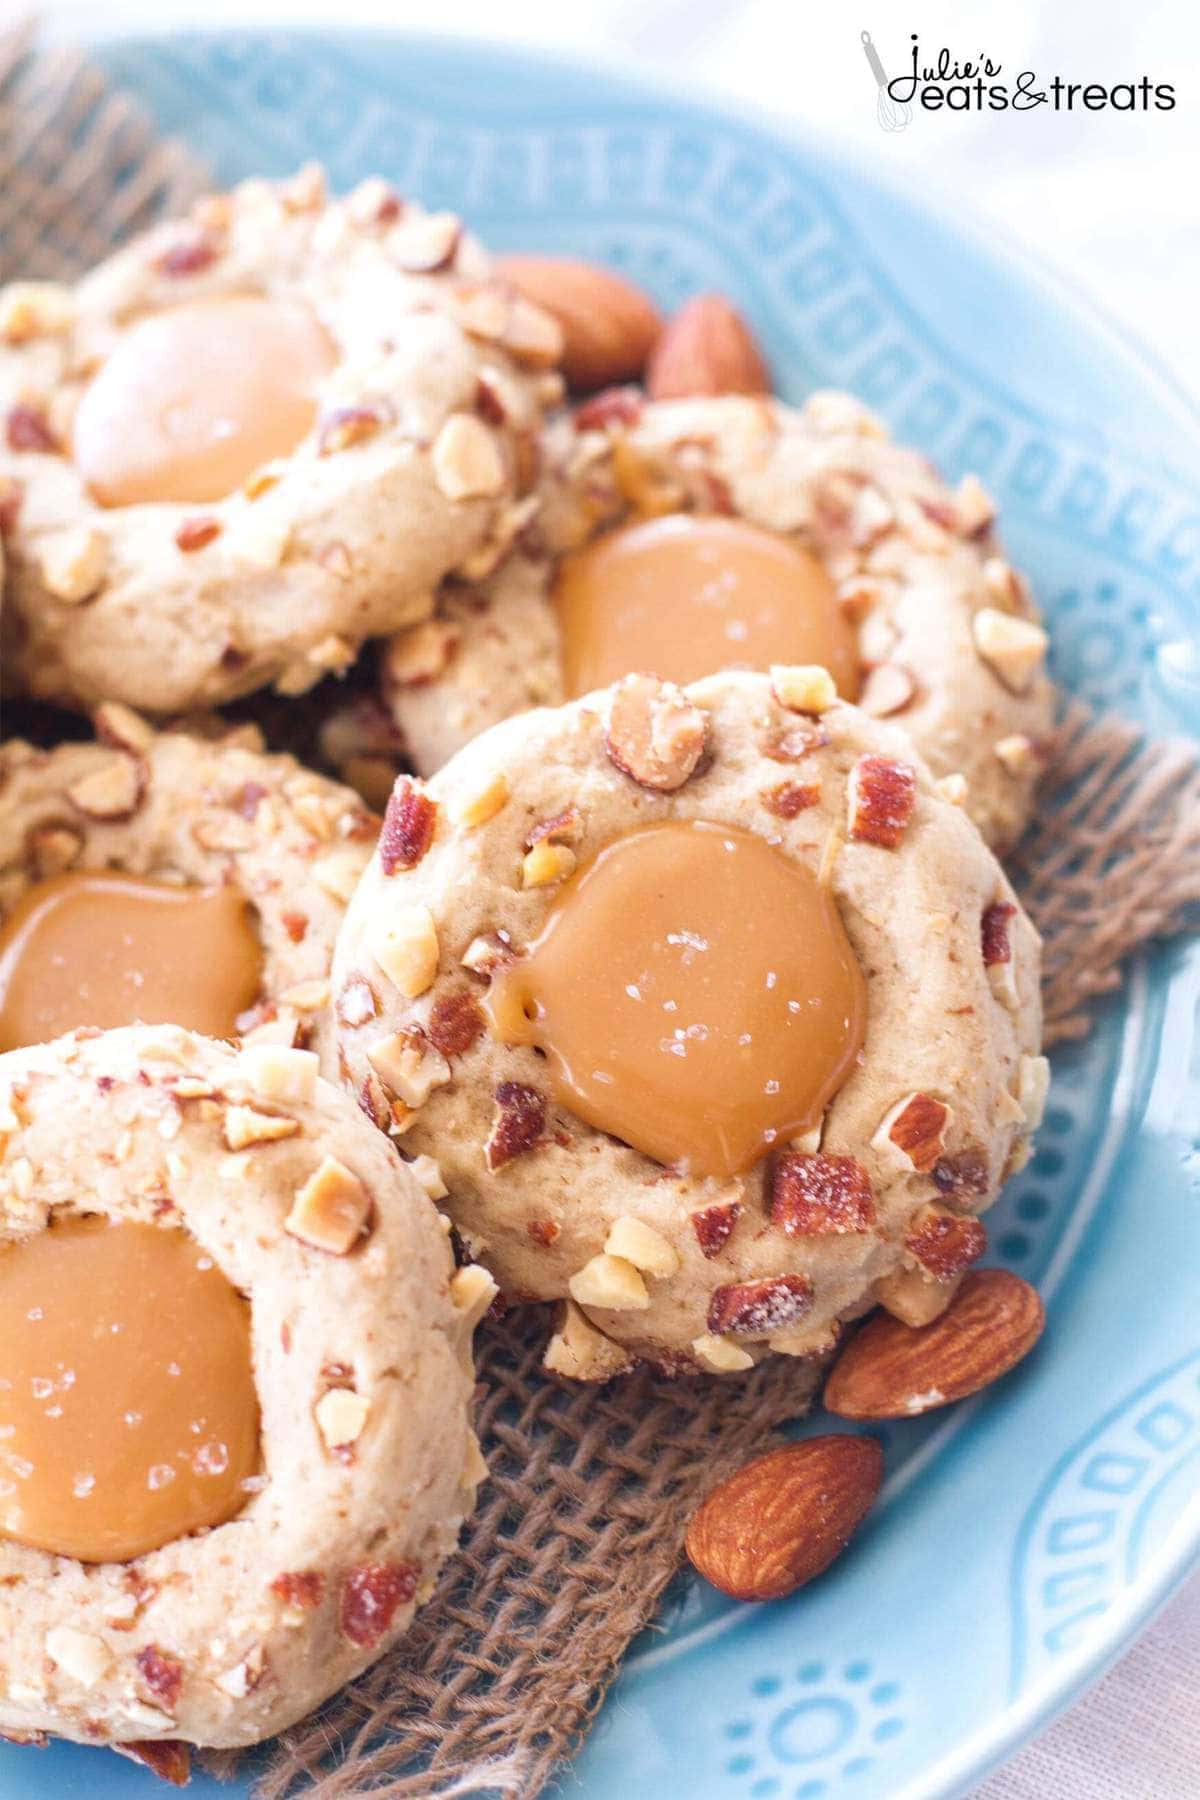 Salted Caramel Almond Thumbprint Cookies ~ Easy, Cookies Are Perfect for Any Holiday Party or Cookie Exchange! Slightly Nutty, Sweet and Incredibly Rich with Salted Caramel Filling!